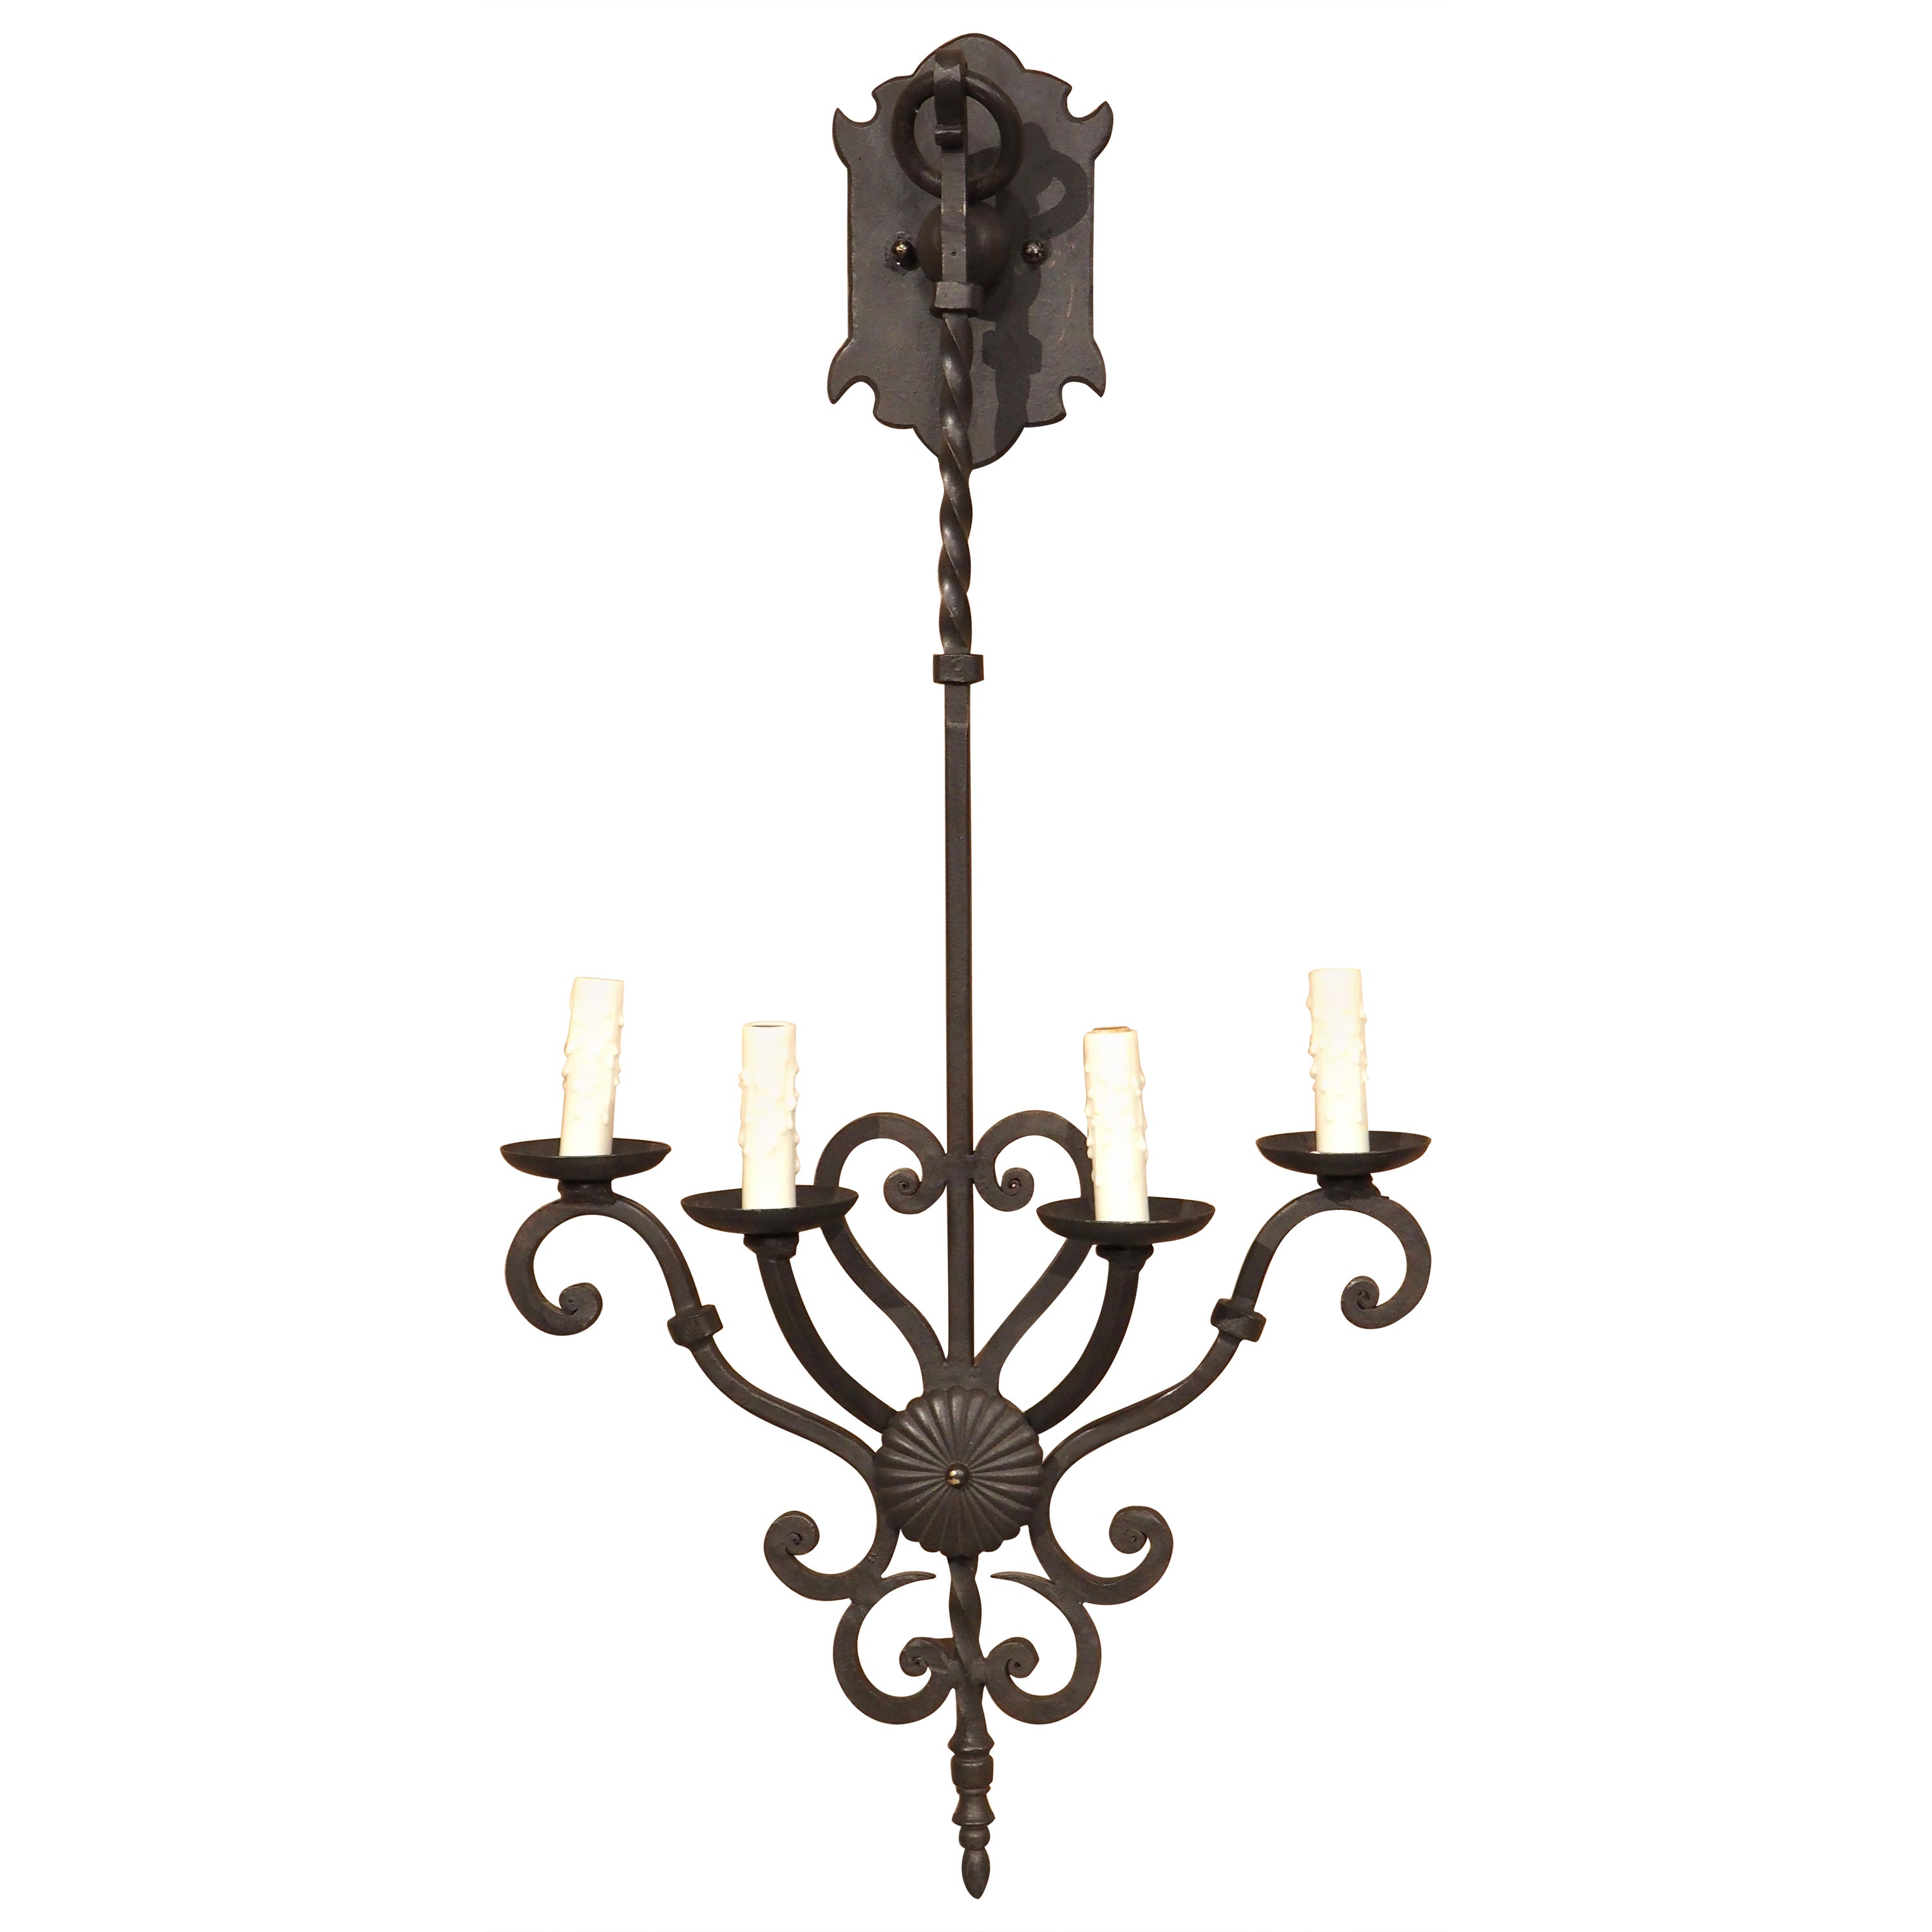 Vilamoura Hand Wrought Iron 4 Light Wall Sconce For Sale